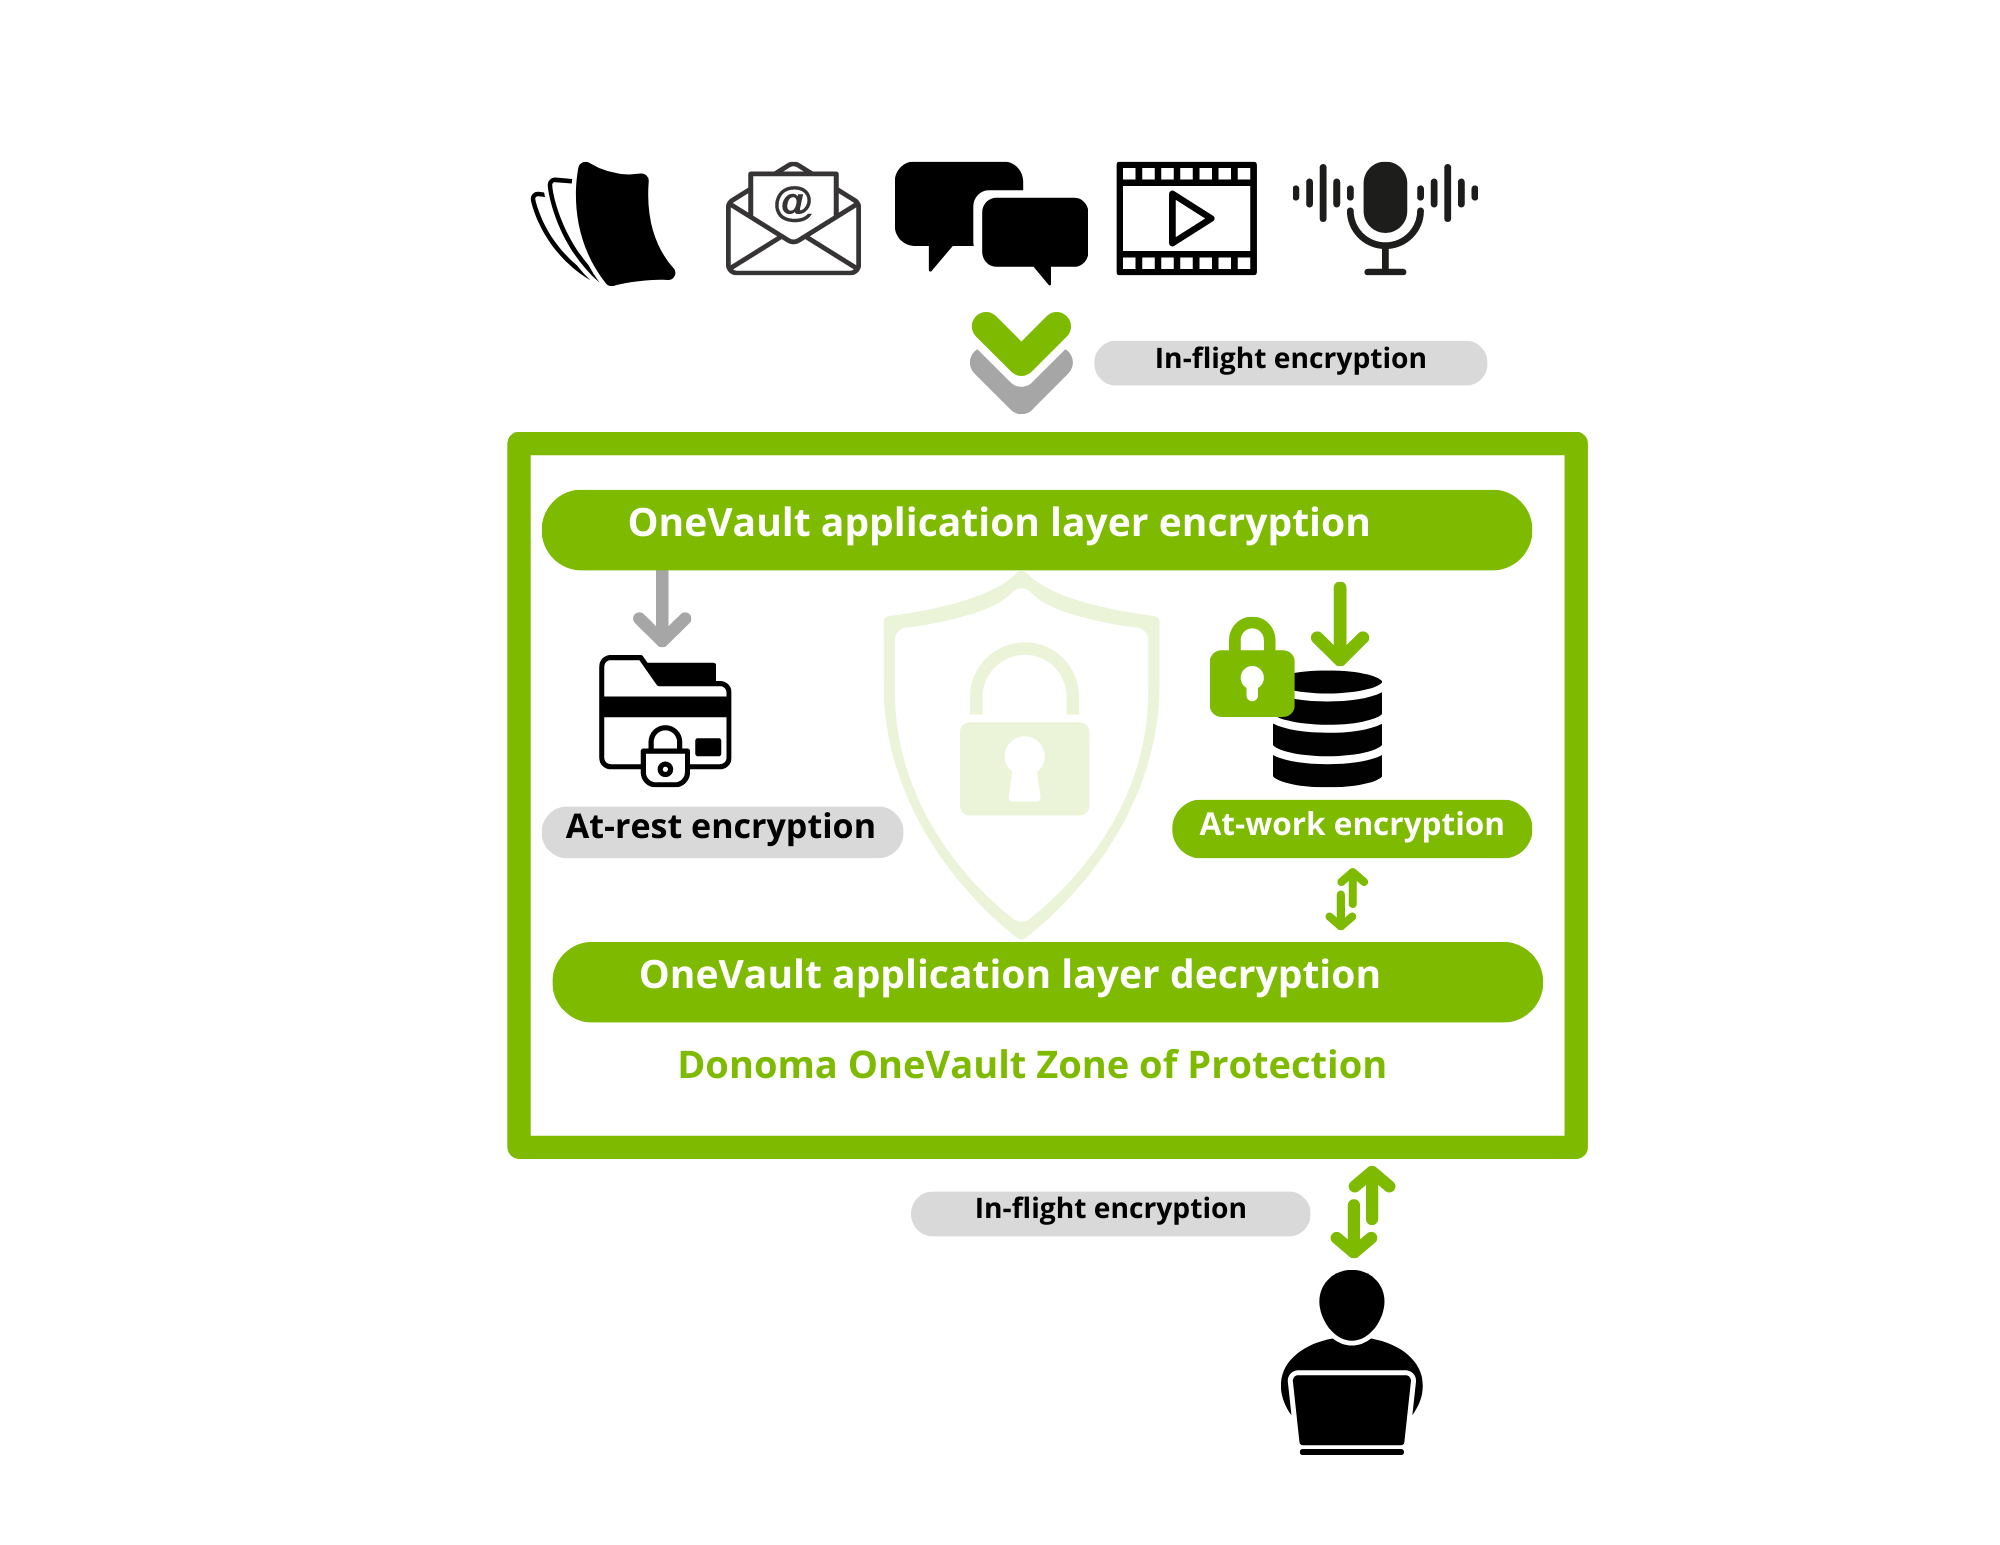 OneVault's encryption in use secures data at all times